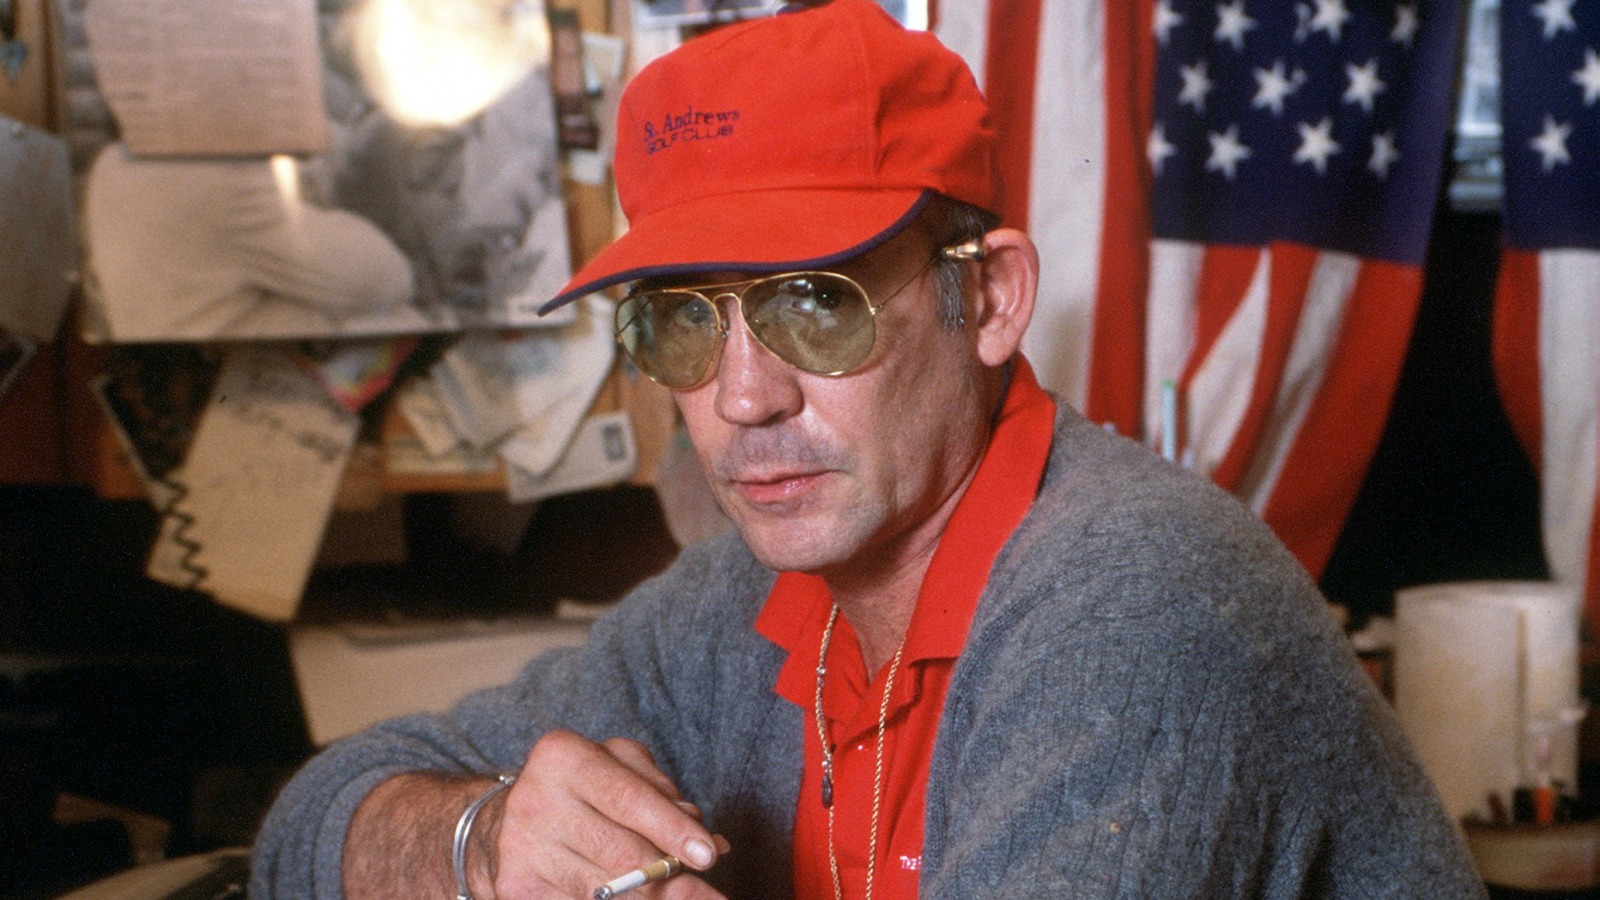 New Hunter S. Thompson documentary drops Sept. 24. What to know